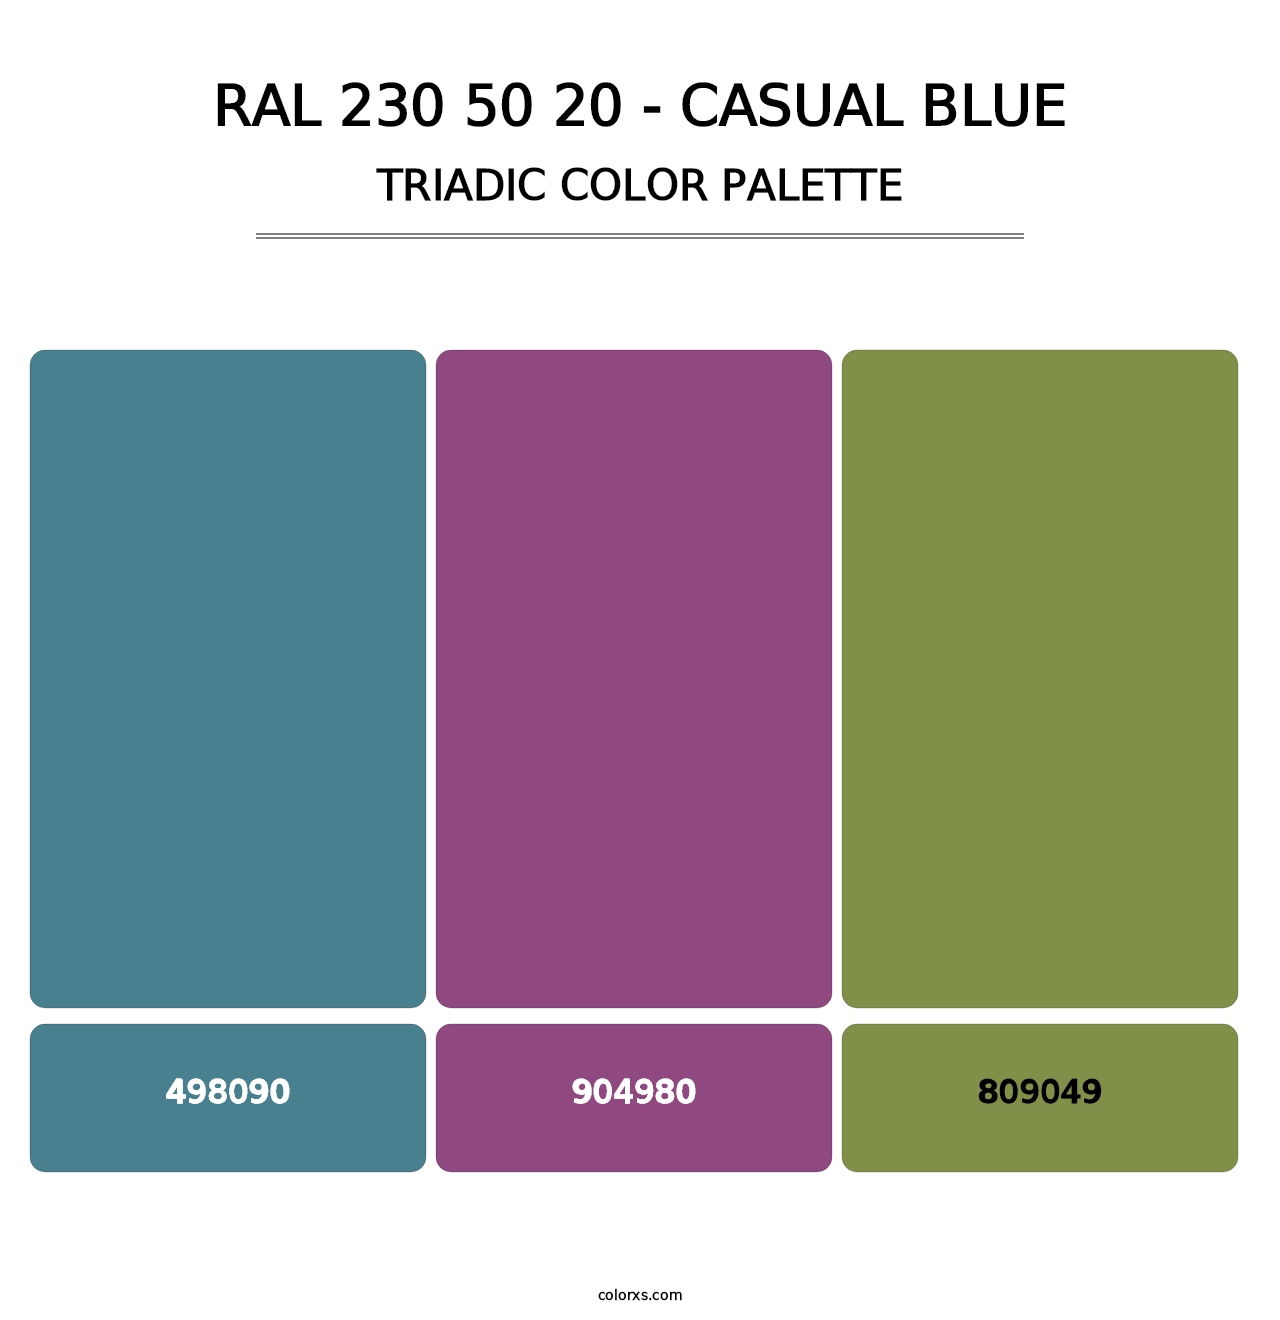 RAL 230 50 20 - Casual Blue - Triadic Color Palette